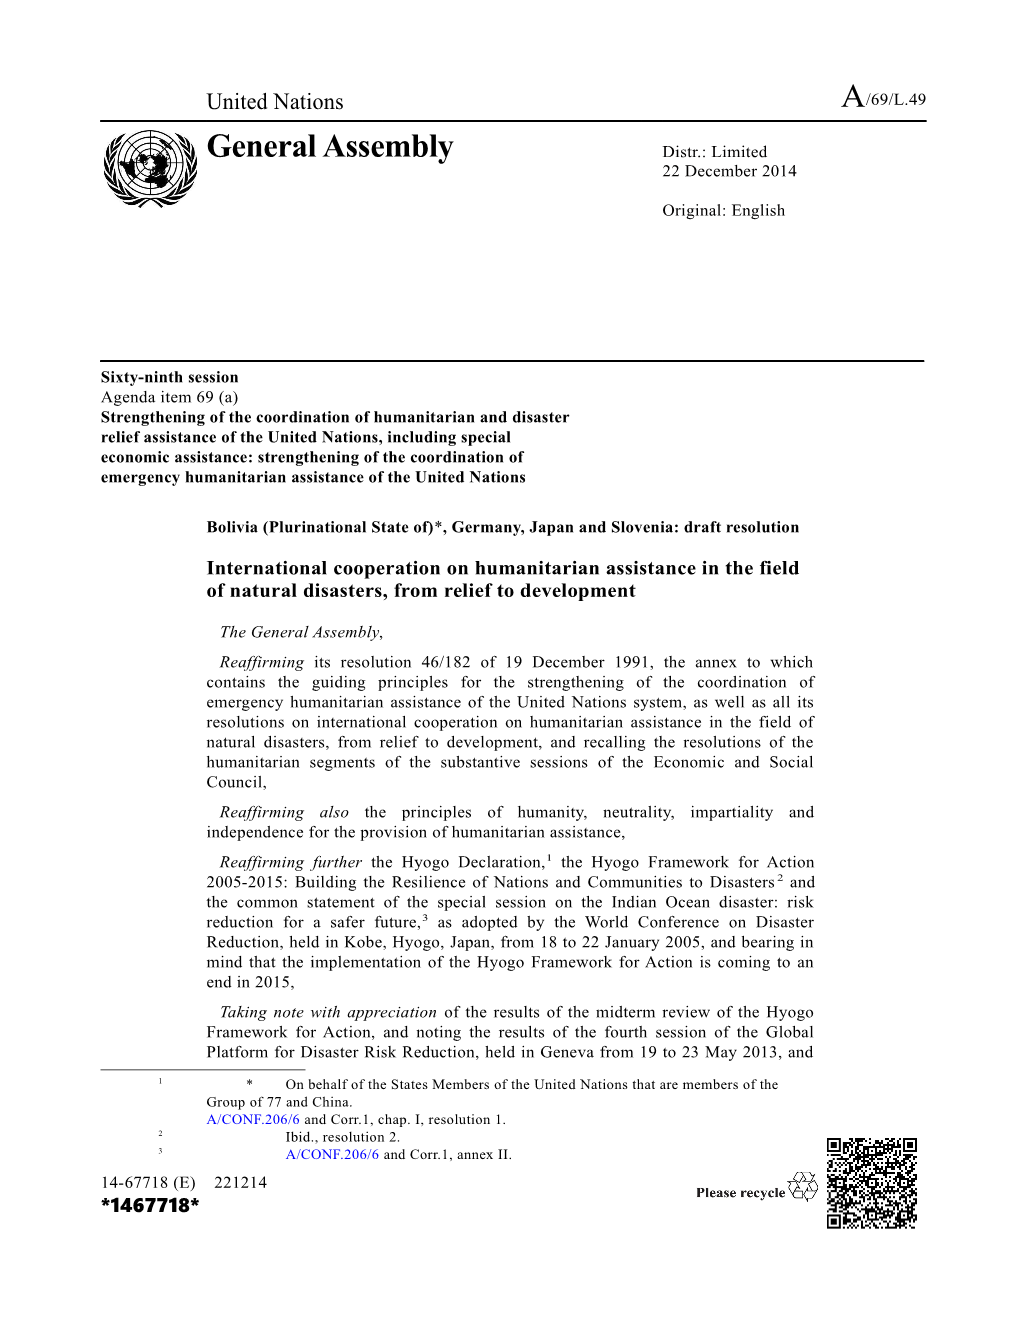 Bolivia (Plurinational State Of)*, Germany, Japan and Slovenia: Draft Resolution